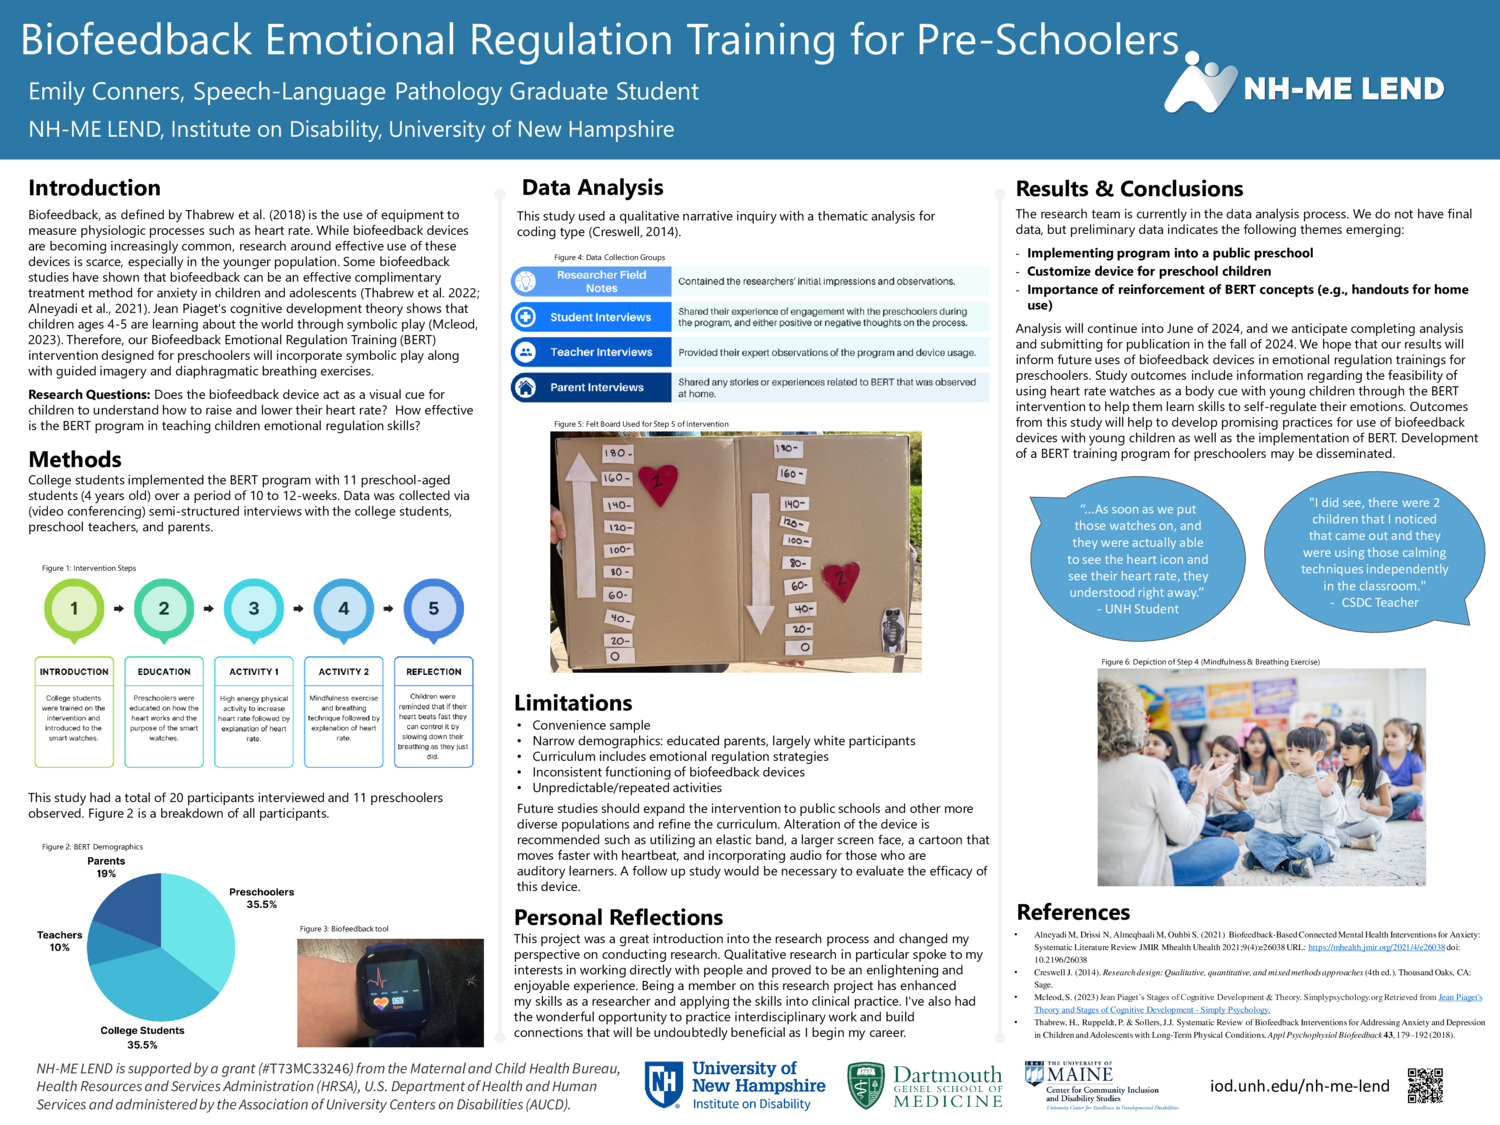 Biofeedback Emotional Regulation Training For Pre-Schoolers by emilyconners